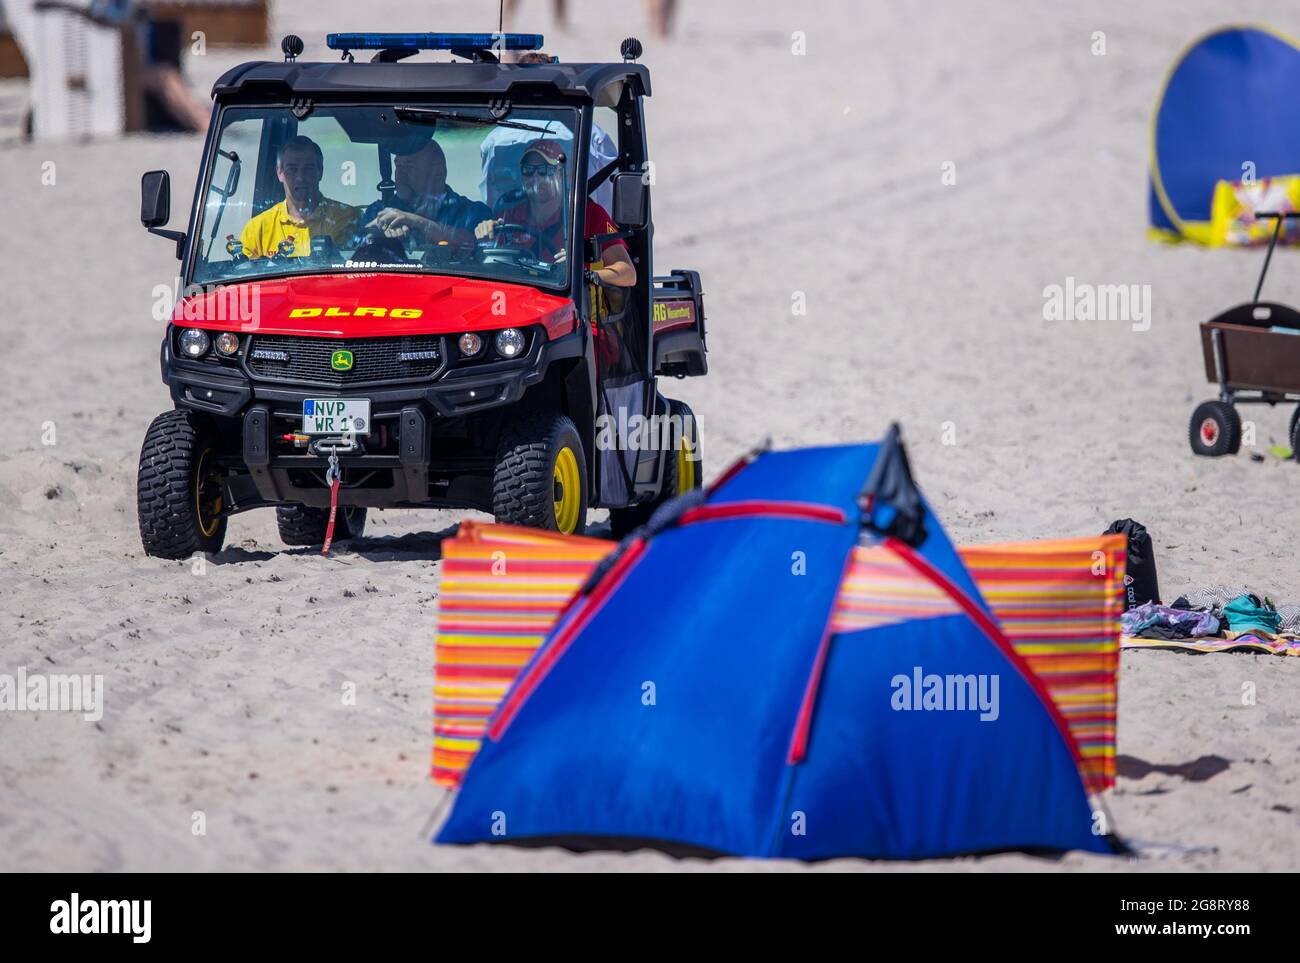 Prerow, Germany. 15th July, 2021. With a special rescue vehicle of the type Gator, lifeguards of the DLRG are on duty at the Baltic Sea beach. Credit: Jens Büttner/dpa-Zentralbild/ZB/dpa/Alamy Live News Stock Photo